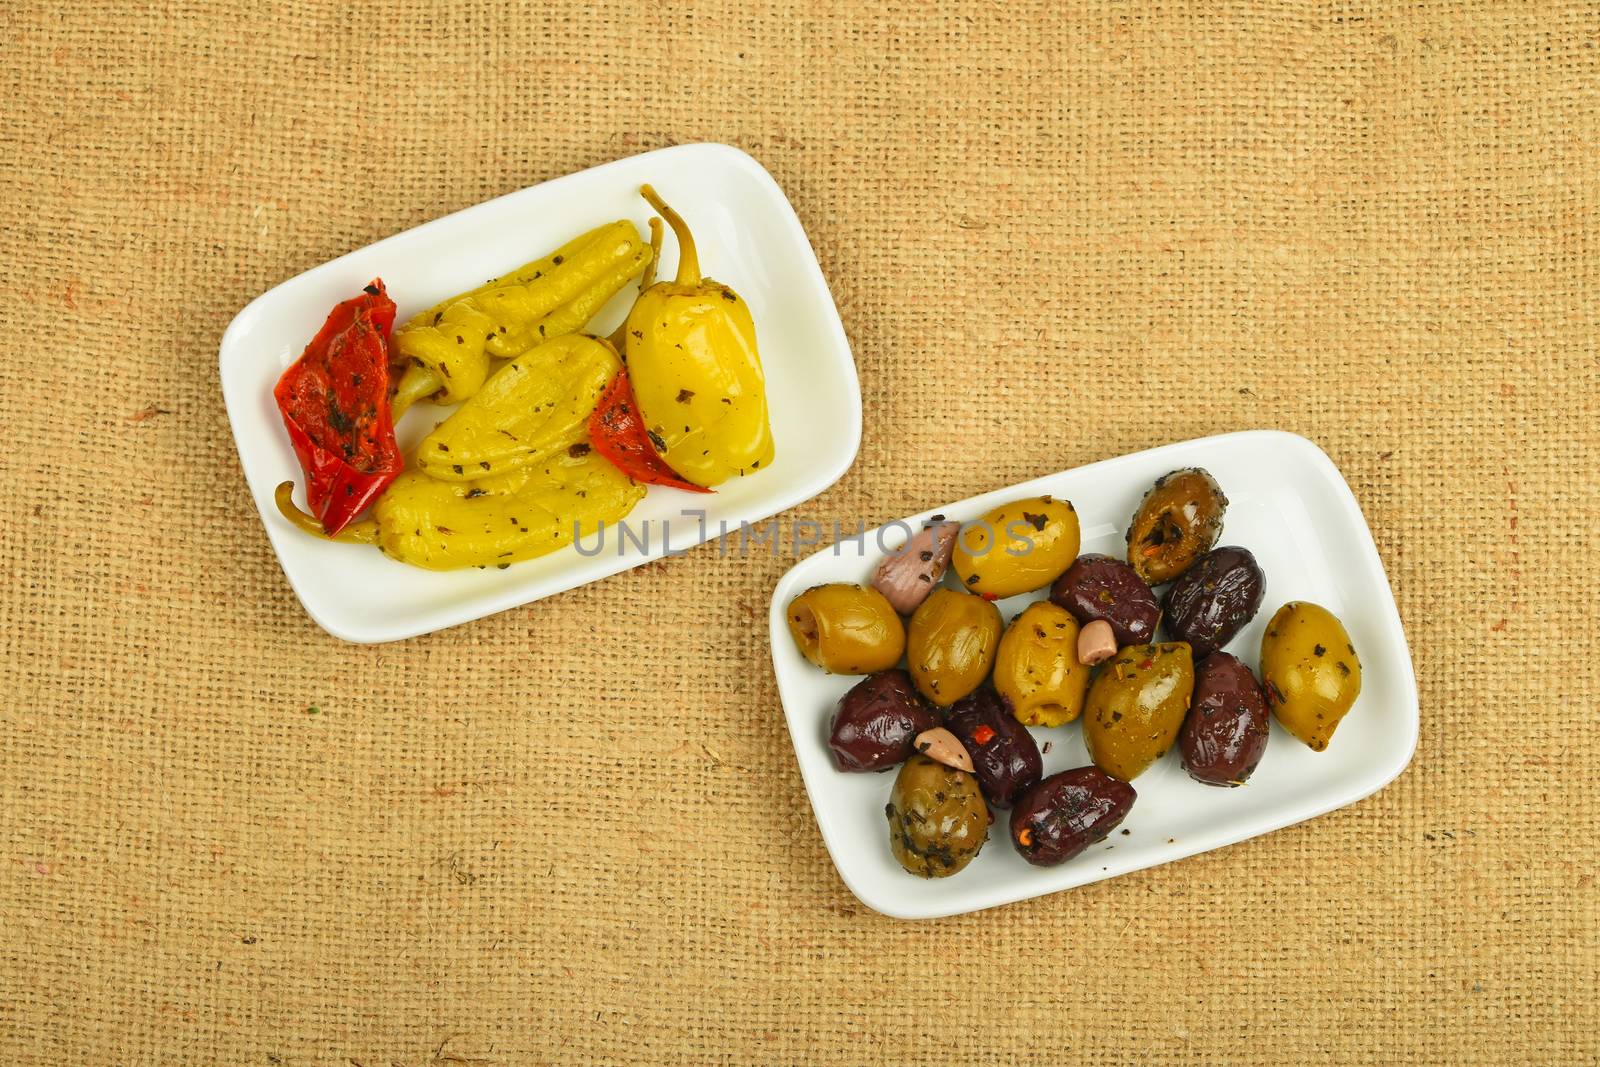 Mediterranean snack of red and green olives and pickled green pepper in two white plates on burlap jute canvas